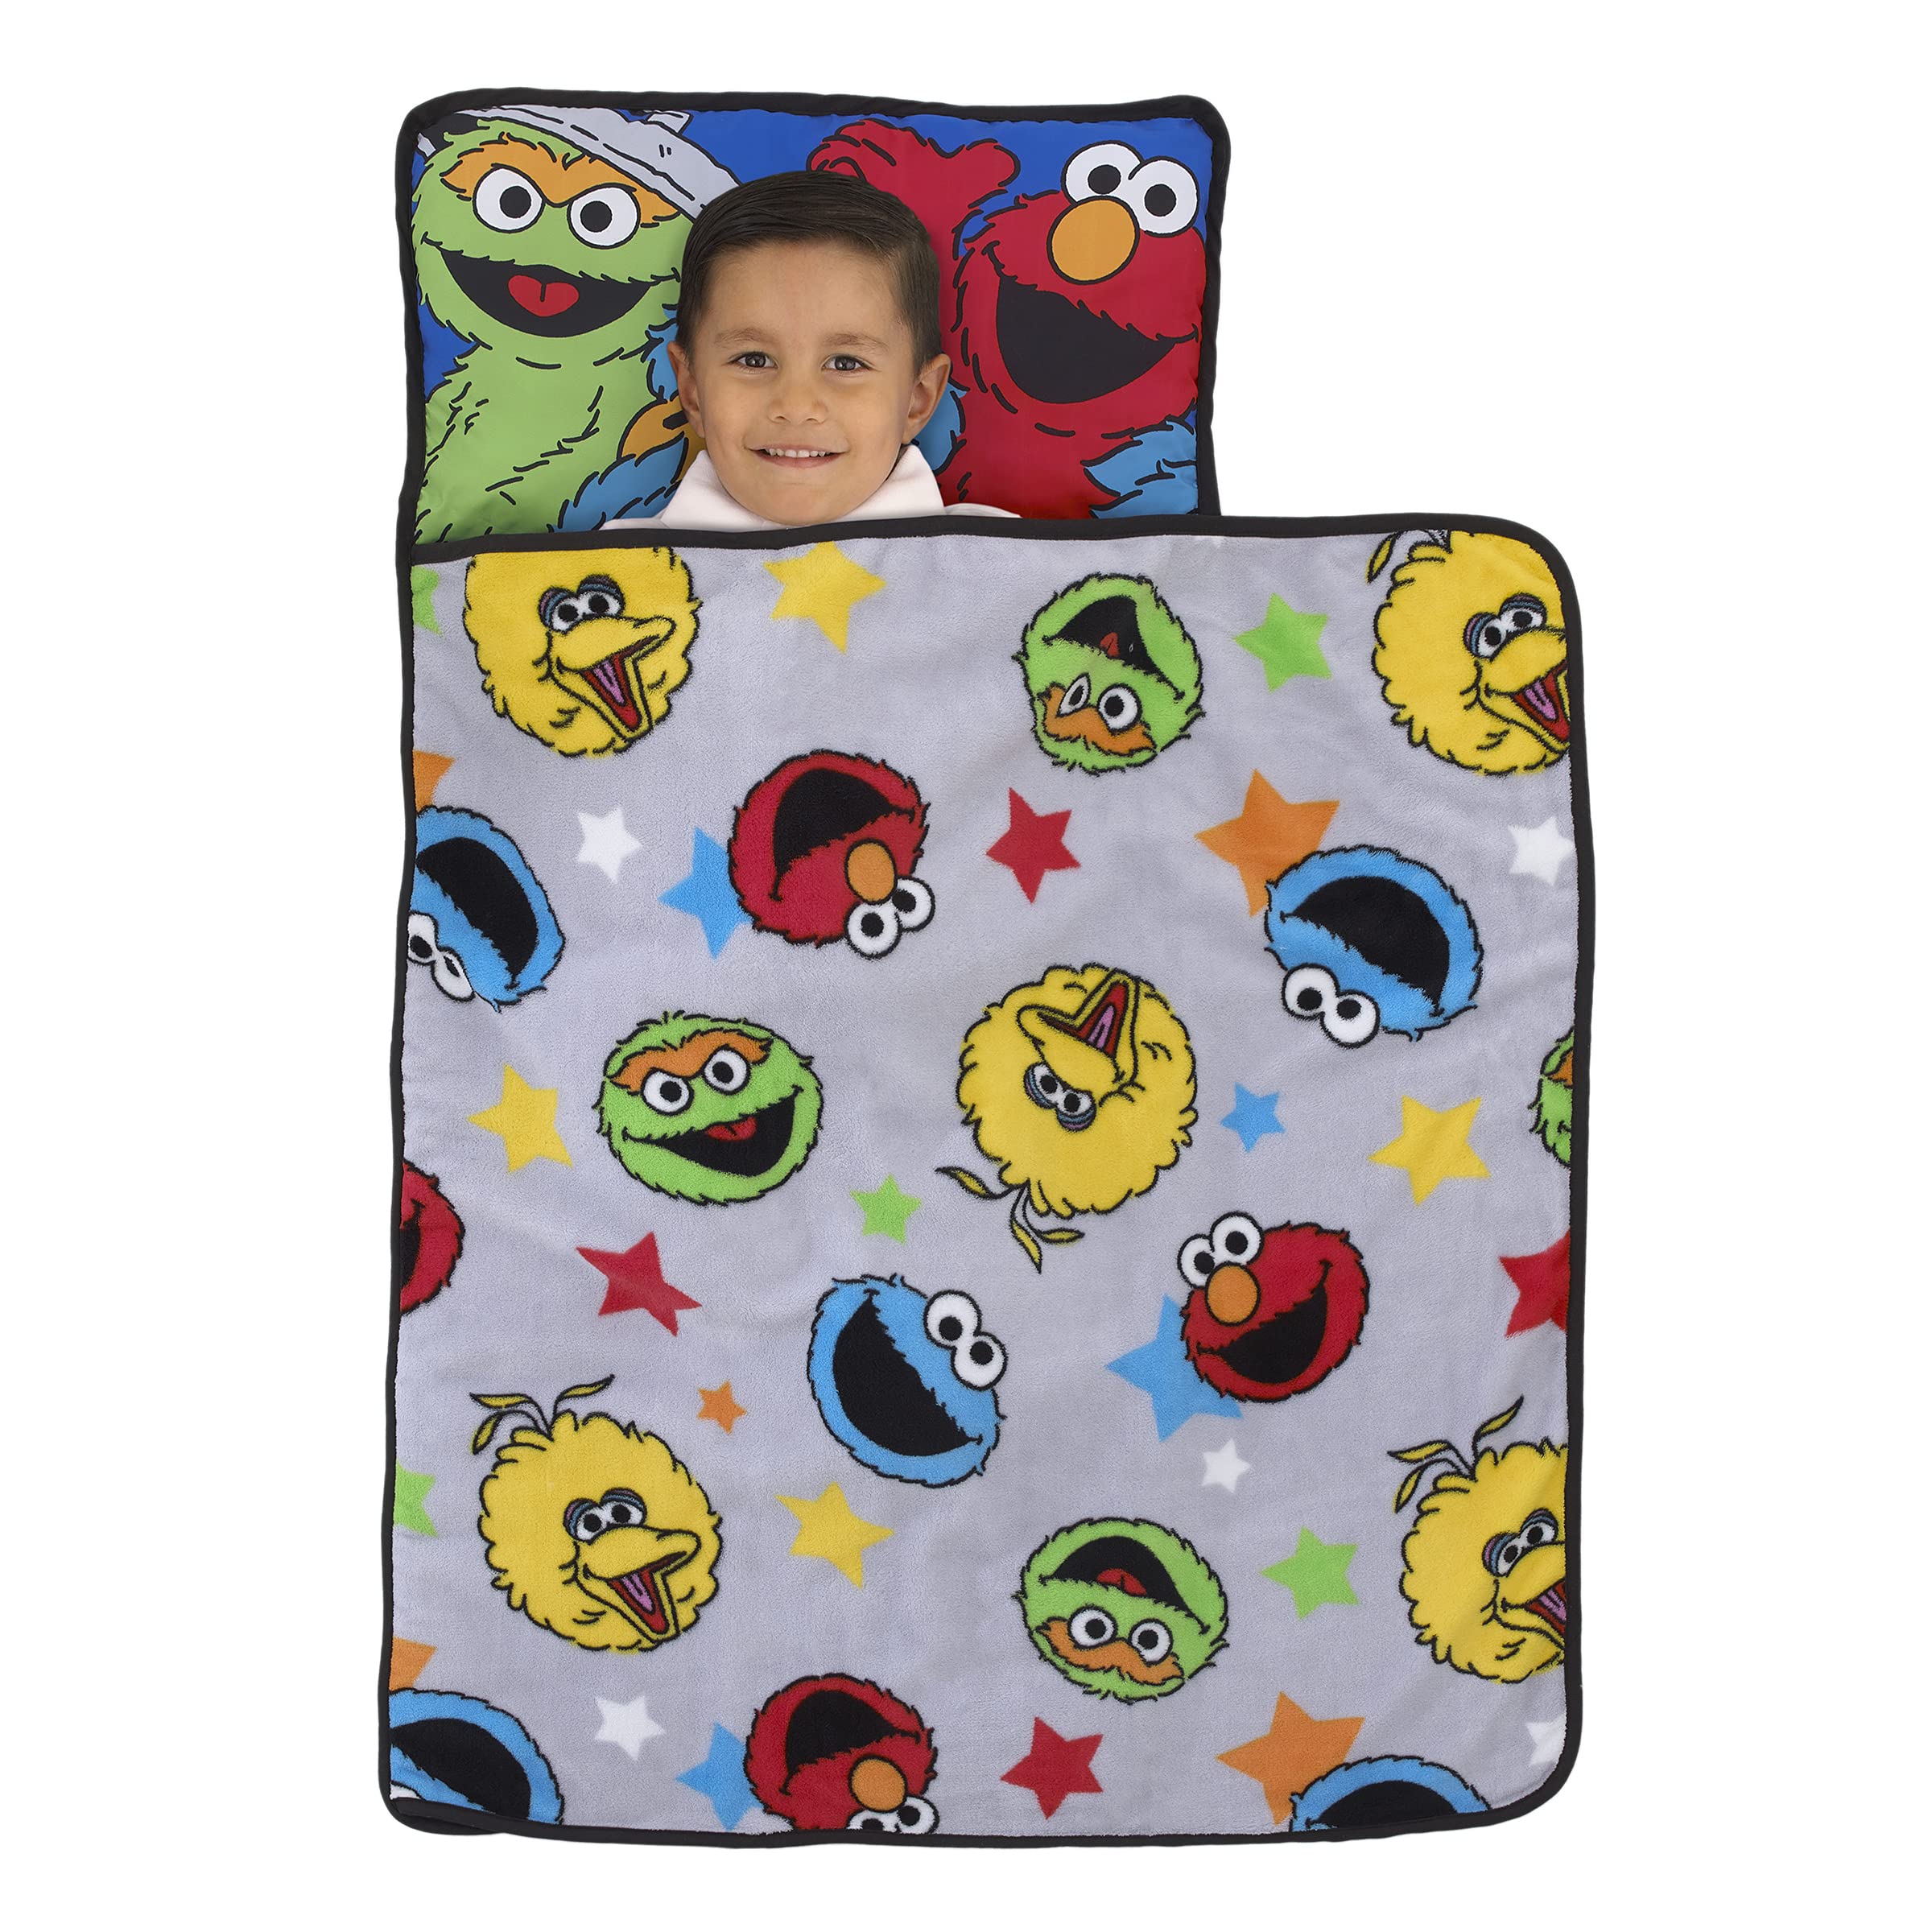 Sesame Street Adventures Blue, Yellow and Red Elmo, Big Bird, Oscar The Grouch and Cookie Monster Toddler Nap Mat